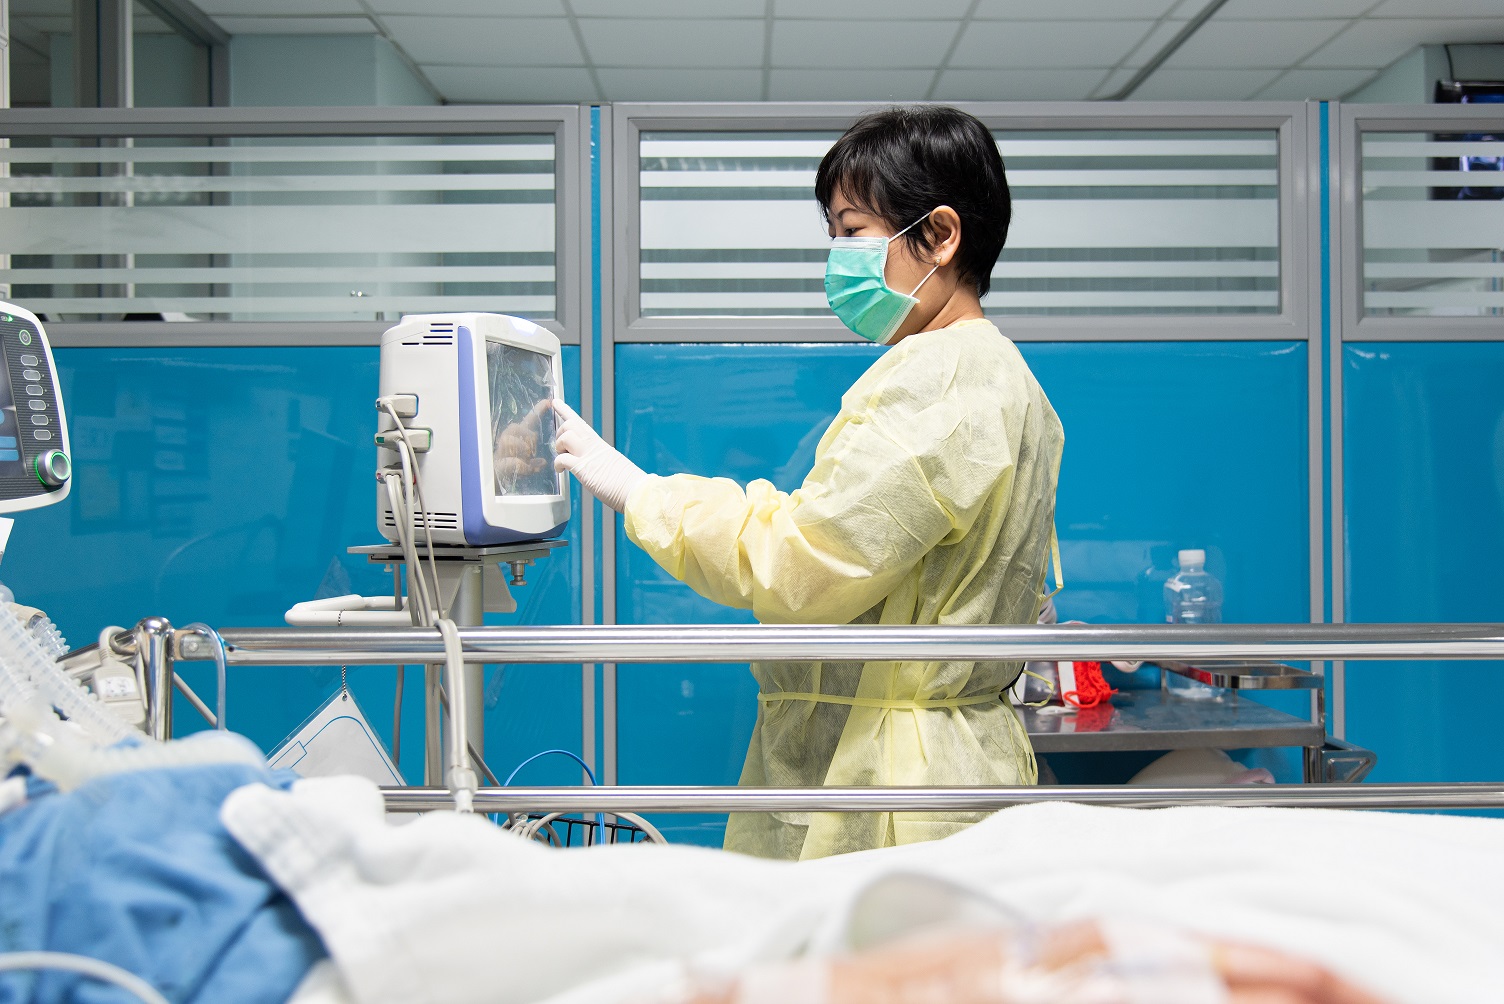 Hospital patient in an ICU unit